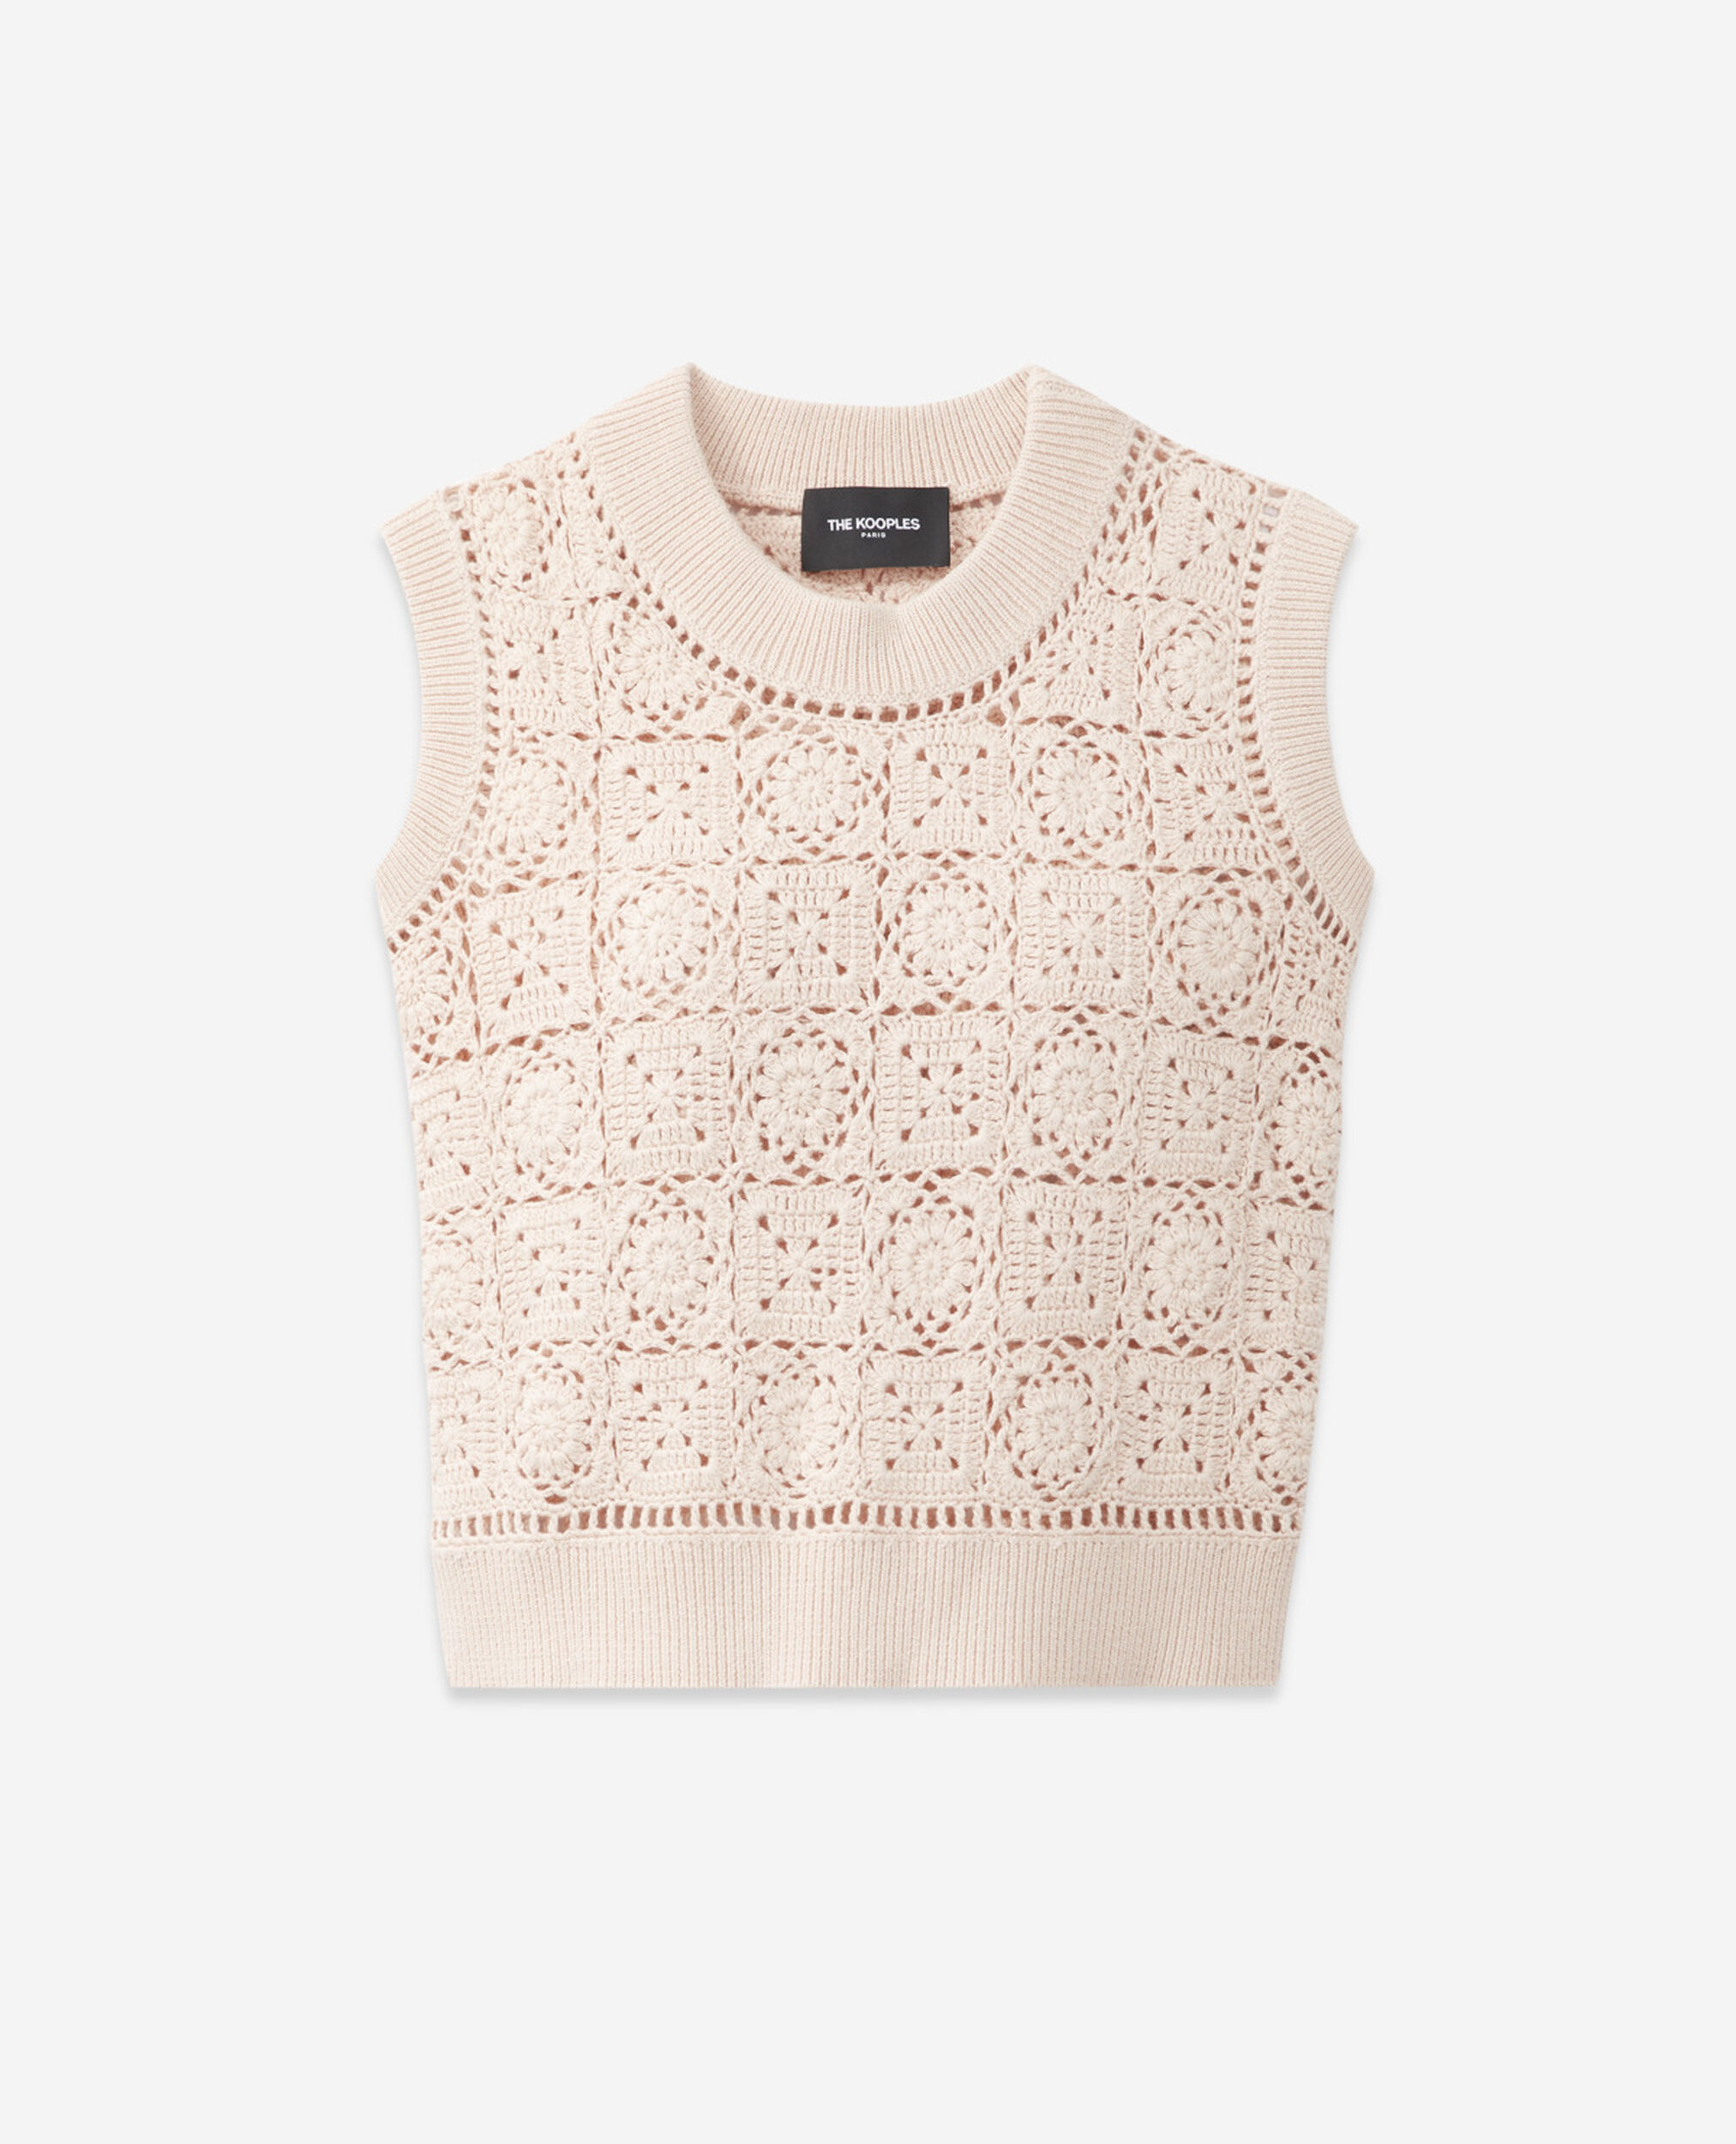 Pull coton rose sans manches effet crochet, PINK, hi-res image number null